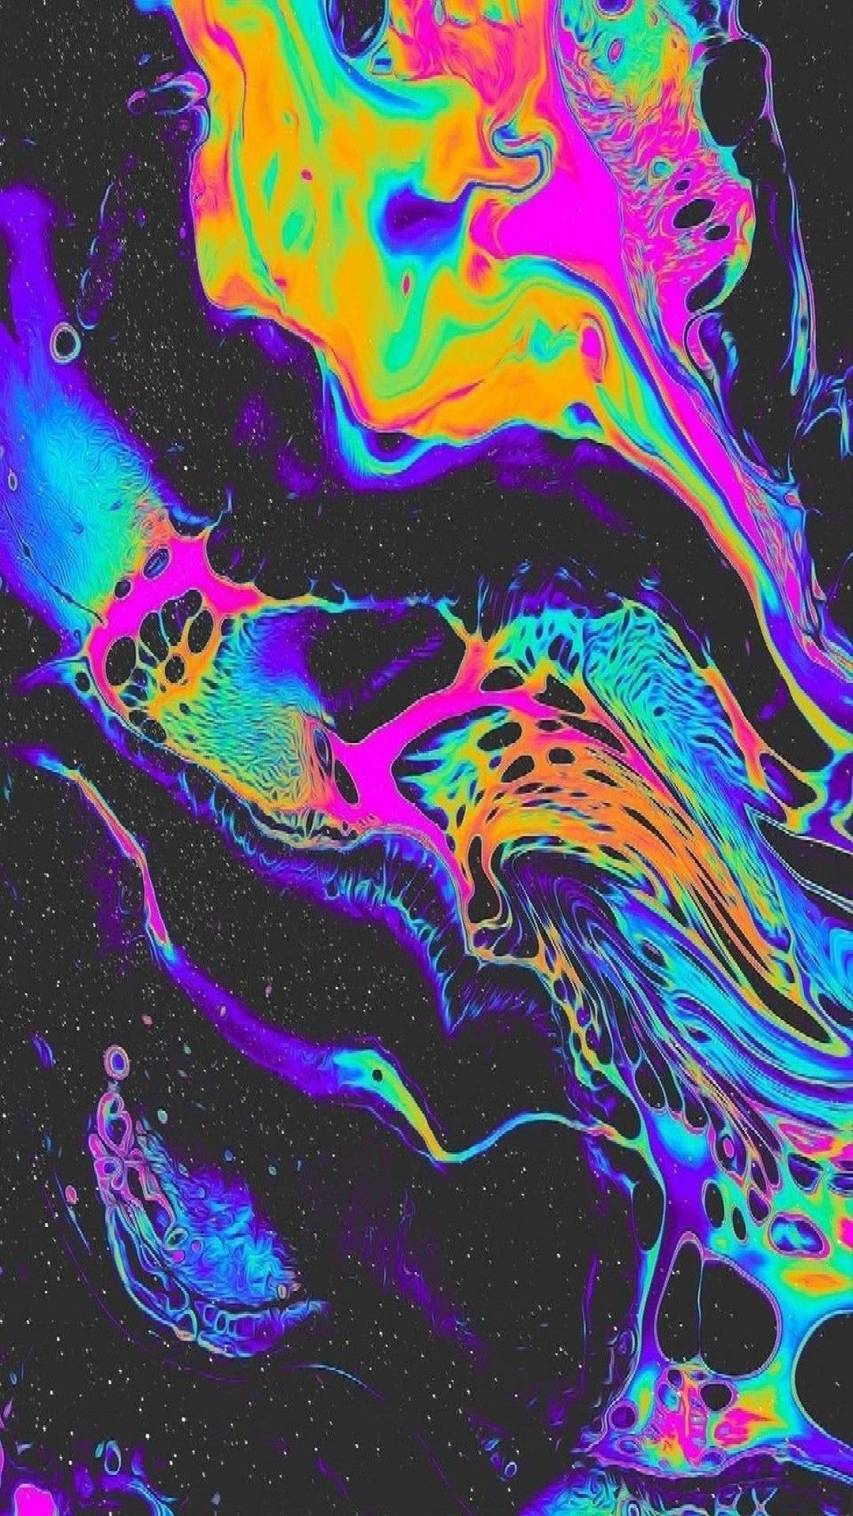  Psychedelisch Hintergrundbild 853x1516. Collection of Psychedelic Wallpaper for Your iPhone Devices